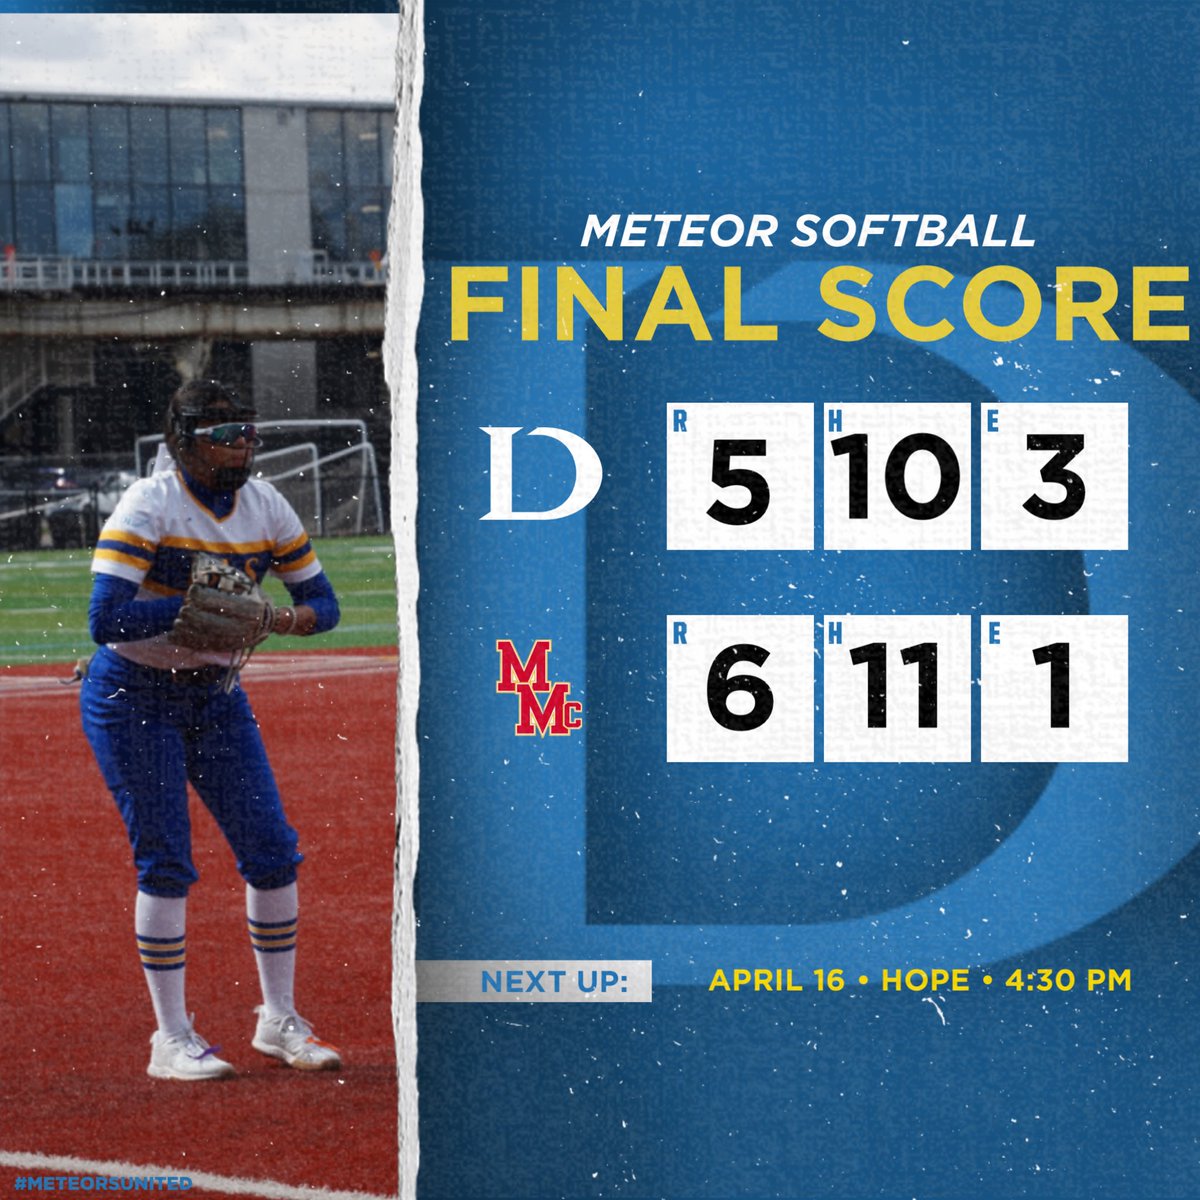 Came up just short to a solid Mighty Macs team. Offense led by Guerrero w/ 2 hits & 3 RBIs, Soto w/ 2 RBIs and Agredano w/ 3 hits. Back on the road tomorrow @ Hope